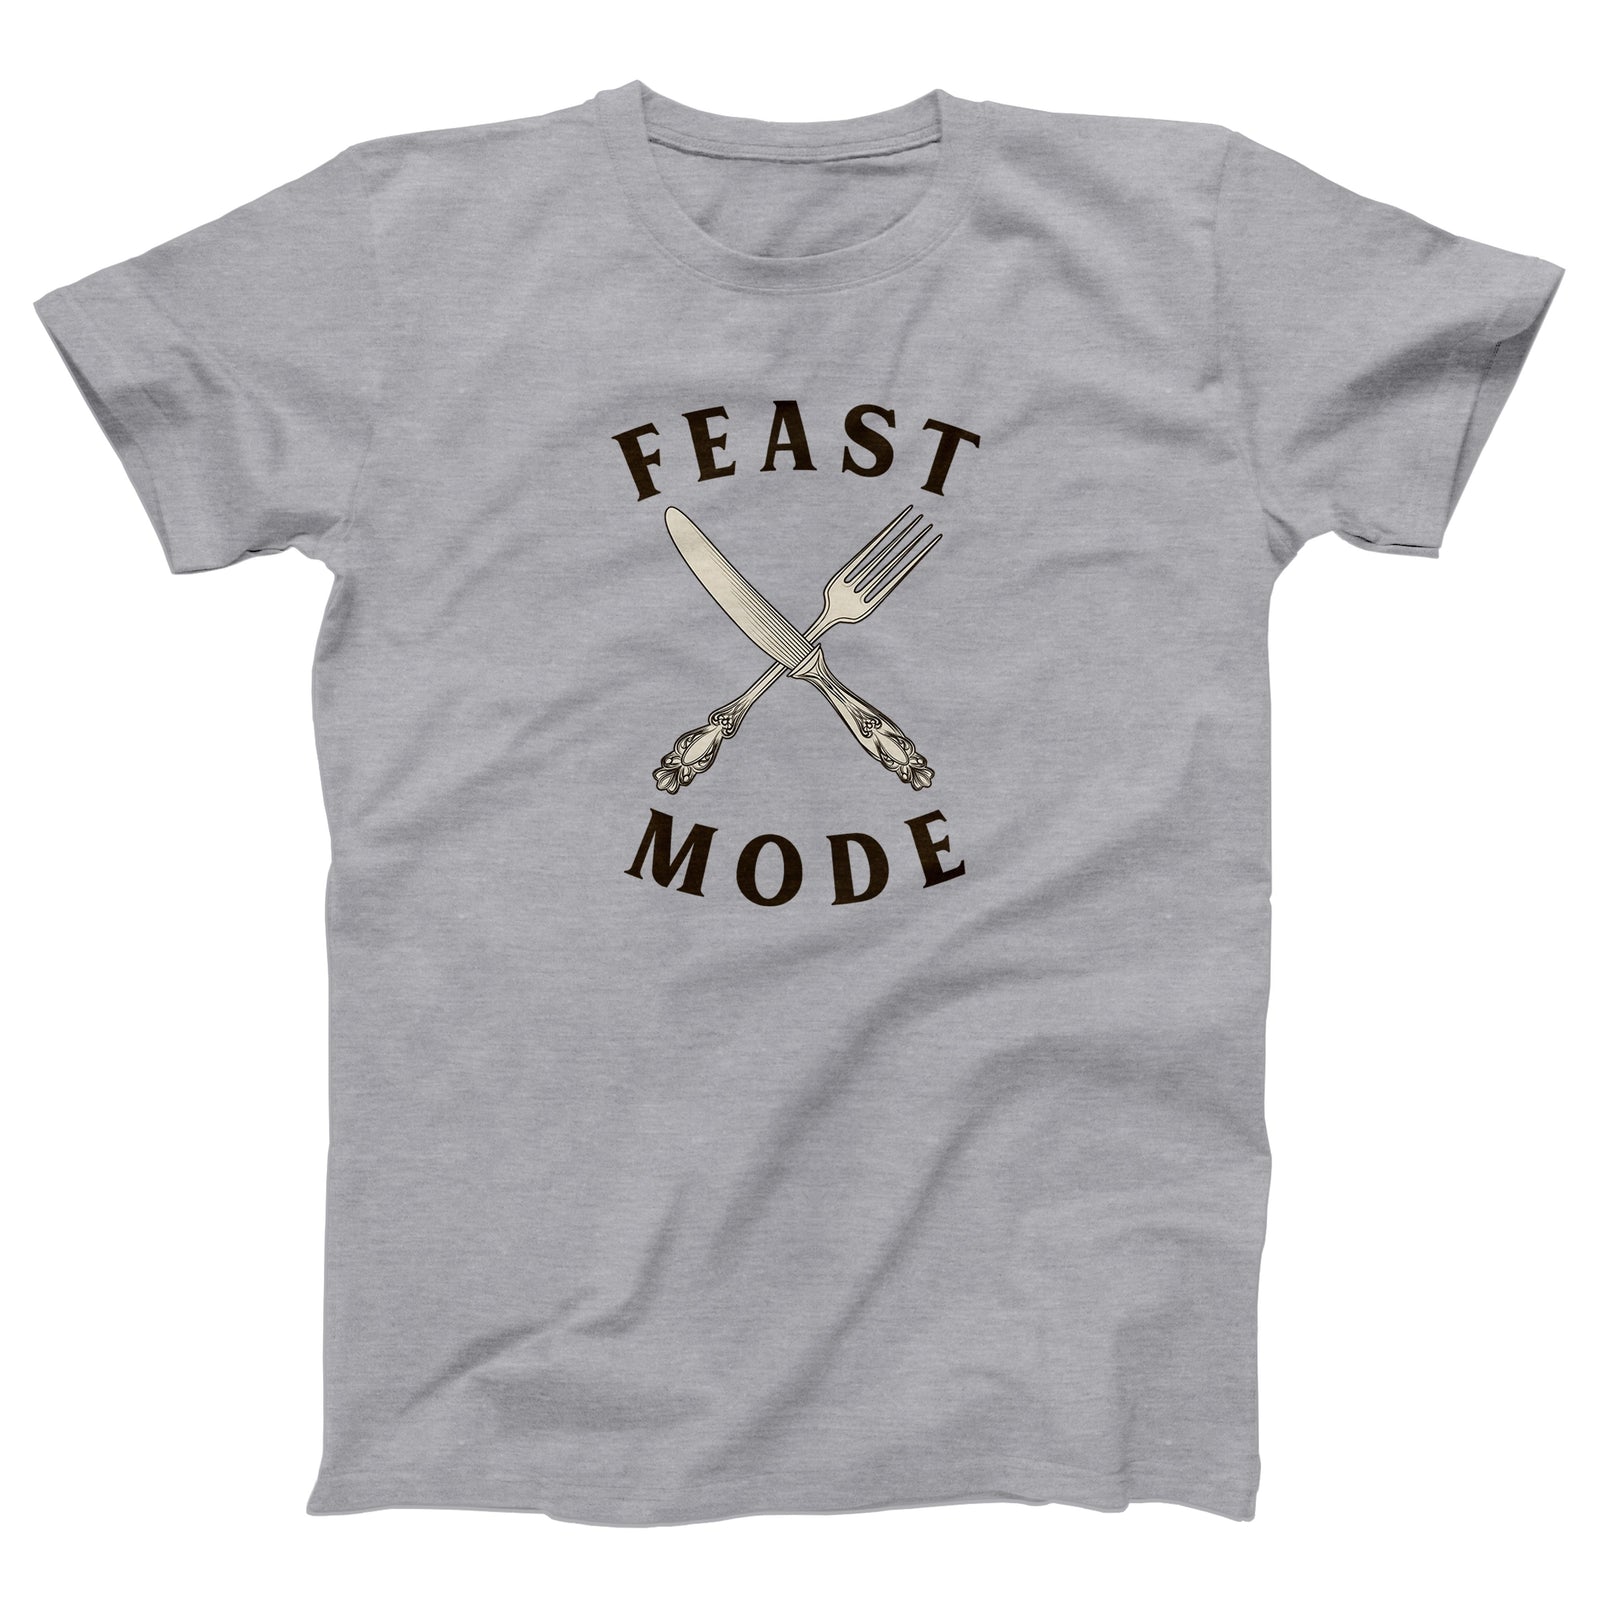 //cdn.shopify.com/s/files/1/0274/2488/2766/products/feast-mode-menunisex-t-shirt-575222_5000x.jpg?v=1603702934 5000w,
    //cdn.shopify.com/s/files/1/0274/2488/2766/products/feast-mode-menunisex-t-shirt-575222_4500x.jpg?v=1603702934 4500w,
    //cdn.shopify.com/s/files/1/0274/2488/2766/products/feast-mode-menunisex-t-shirt-575222_4000x.jpg?v=1603702934 4000w,
    //cdn.shopify.com/s/files/1/0274/2488/2766/products/feast-mode-menunisex-t-shirt-575222_3500x.jpg?v=1603702934 3500w,
    //cdn.shopify.com/s/files/1/0274/2488/2766/products/feast-mode-menunisex-t-shirt-575222_3000x.jpg?v=1603702934 3000w,
    //cdn.shopify.com/s/files/1/0274/2488/2766/products/feast-mode-menunisex-t-shirt-575222_2500x.jpg?v=1603702934 2500w,
    //cdn.shopify.com/s/files/1/0274/2488/2766/products/feast-mode-menunisex-t-shirt-575222_2000x.jpg?v=1603702934 2000w,
    //cdn.shopify.com/s/files/1/0274/2488/2766/products/feast-mode-menunisex-t-shirt-575222_1800x.jpg?v=1603702934 1800w,
    //cdn.shopify.com/s/files/1/0274/2488/2766/products/feast-mode-menunisex-t-shirt-575222_1600x.jpg?v=1603702934 1600w,
    //cdn.shopify.com/s/files/1/0274/2488/2766/products/feast-mode-menunisex-t-shirt-575222_1400x.jpg?v=1603702934 1400w,
    //cdn.shopify.com/s/files/1/0274/2488/2766/products/feast-mode-menunisex-t-shirt-575222_1200x.jpg?v=1603702934 1200w,
    //cdn.shopify.com/s/files/1/0274/2488/2766/products/feast-mode-menunisex-t-shirt-575222_1000x.jpg?v=1603702934 1000w,
    //cdn.shopify.com/s/files/1/0274/2488/2766/products/feast-mode-menunisex-t-shirt-575222_800x.jpg?v=1603702934 800w,
    //cdn.shopify.com/s/files/1/0274/2488/2766/products/feast-mode-menunisex-t-shirt-575222_600x.jpg?v=1603702934 600w,
    //cdn.shopify.com/s/files/1/0274/2488/2766/products/feast-mode-menunisex-t-shirt-575222_400x.jpg?v=1603702934 400w,
    //cdn.shopify.com/s/files/1/0274/2488/2766/products/feast-mode-menunisex-t-shirt-575222_200x.jpg?v=1603702934 200w